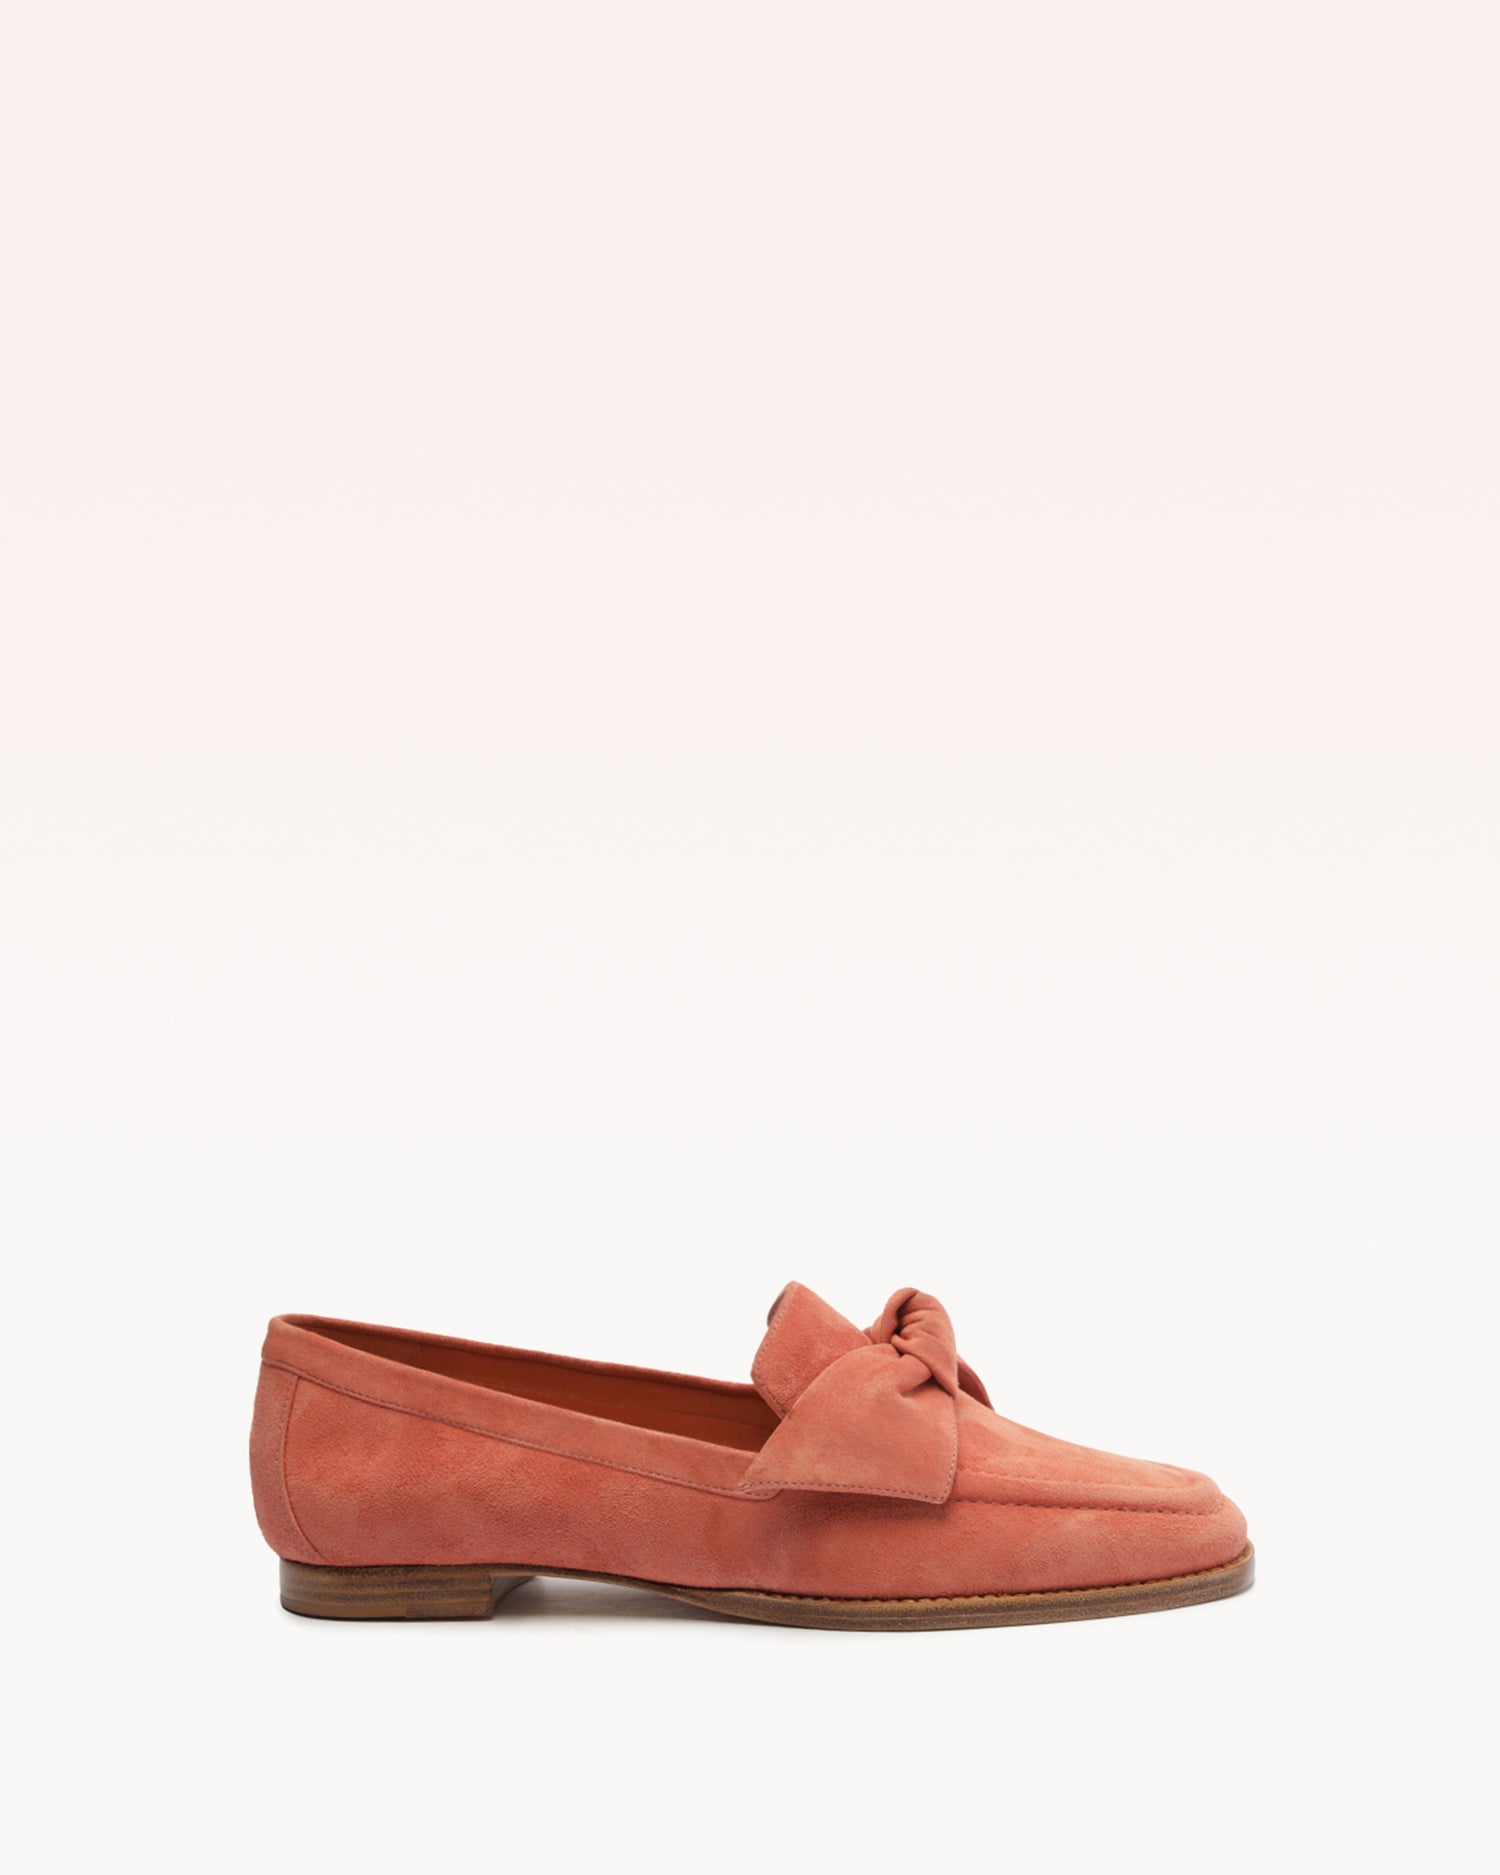 Maxi Clarita Loafer Suede Guava Loafers S/23 35 Guava Suede